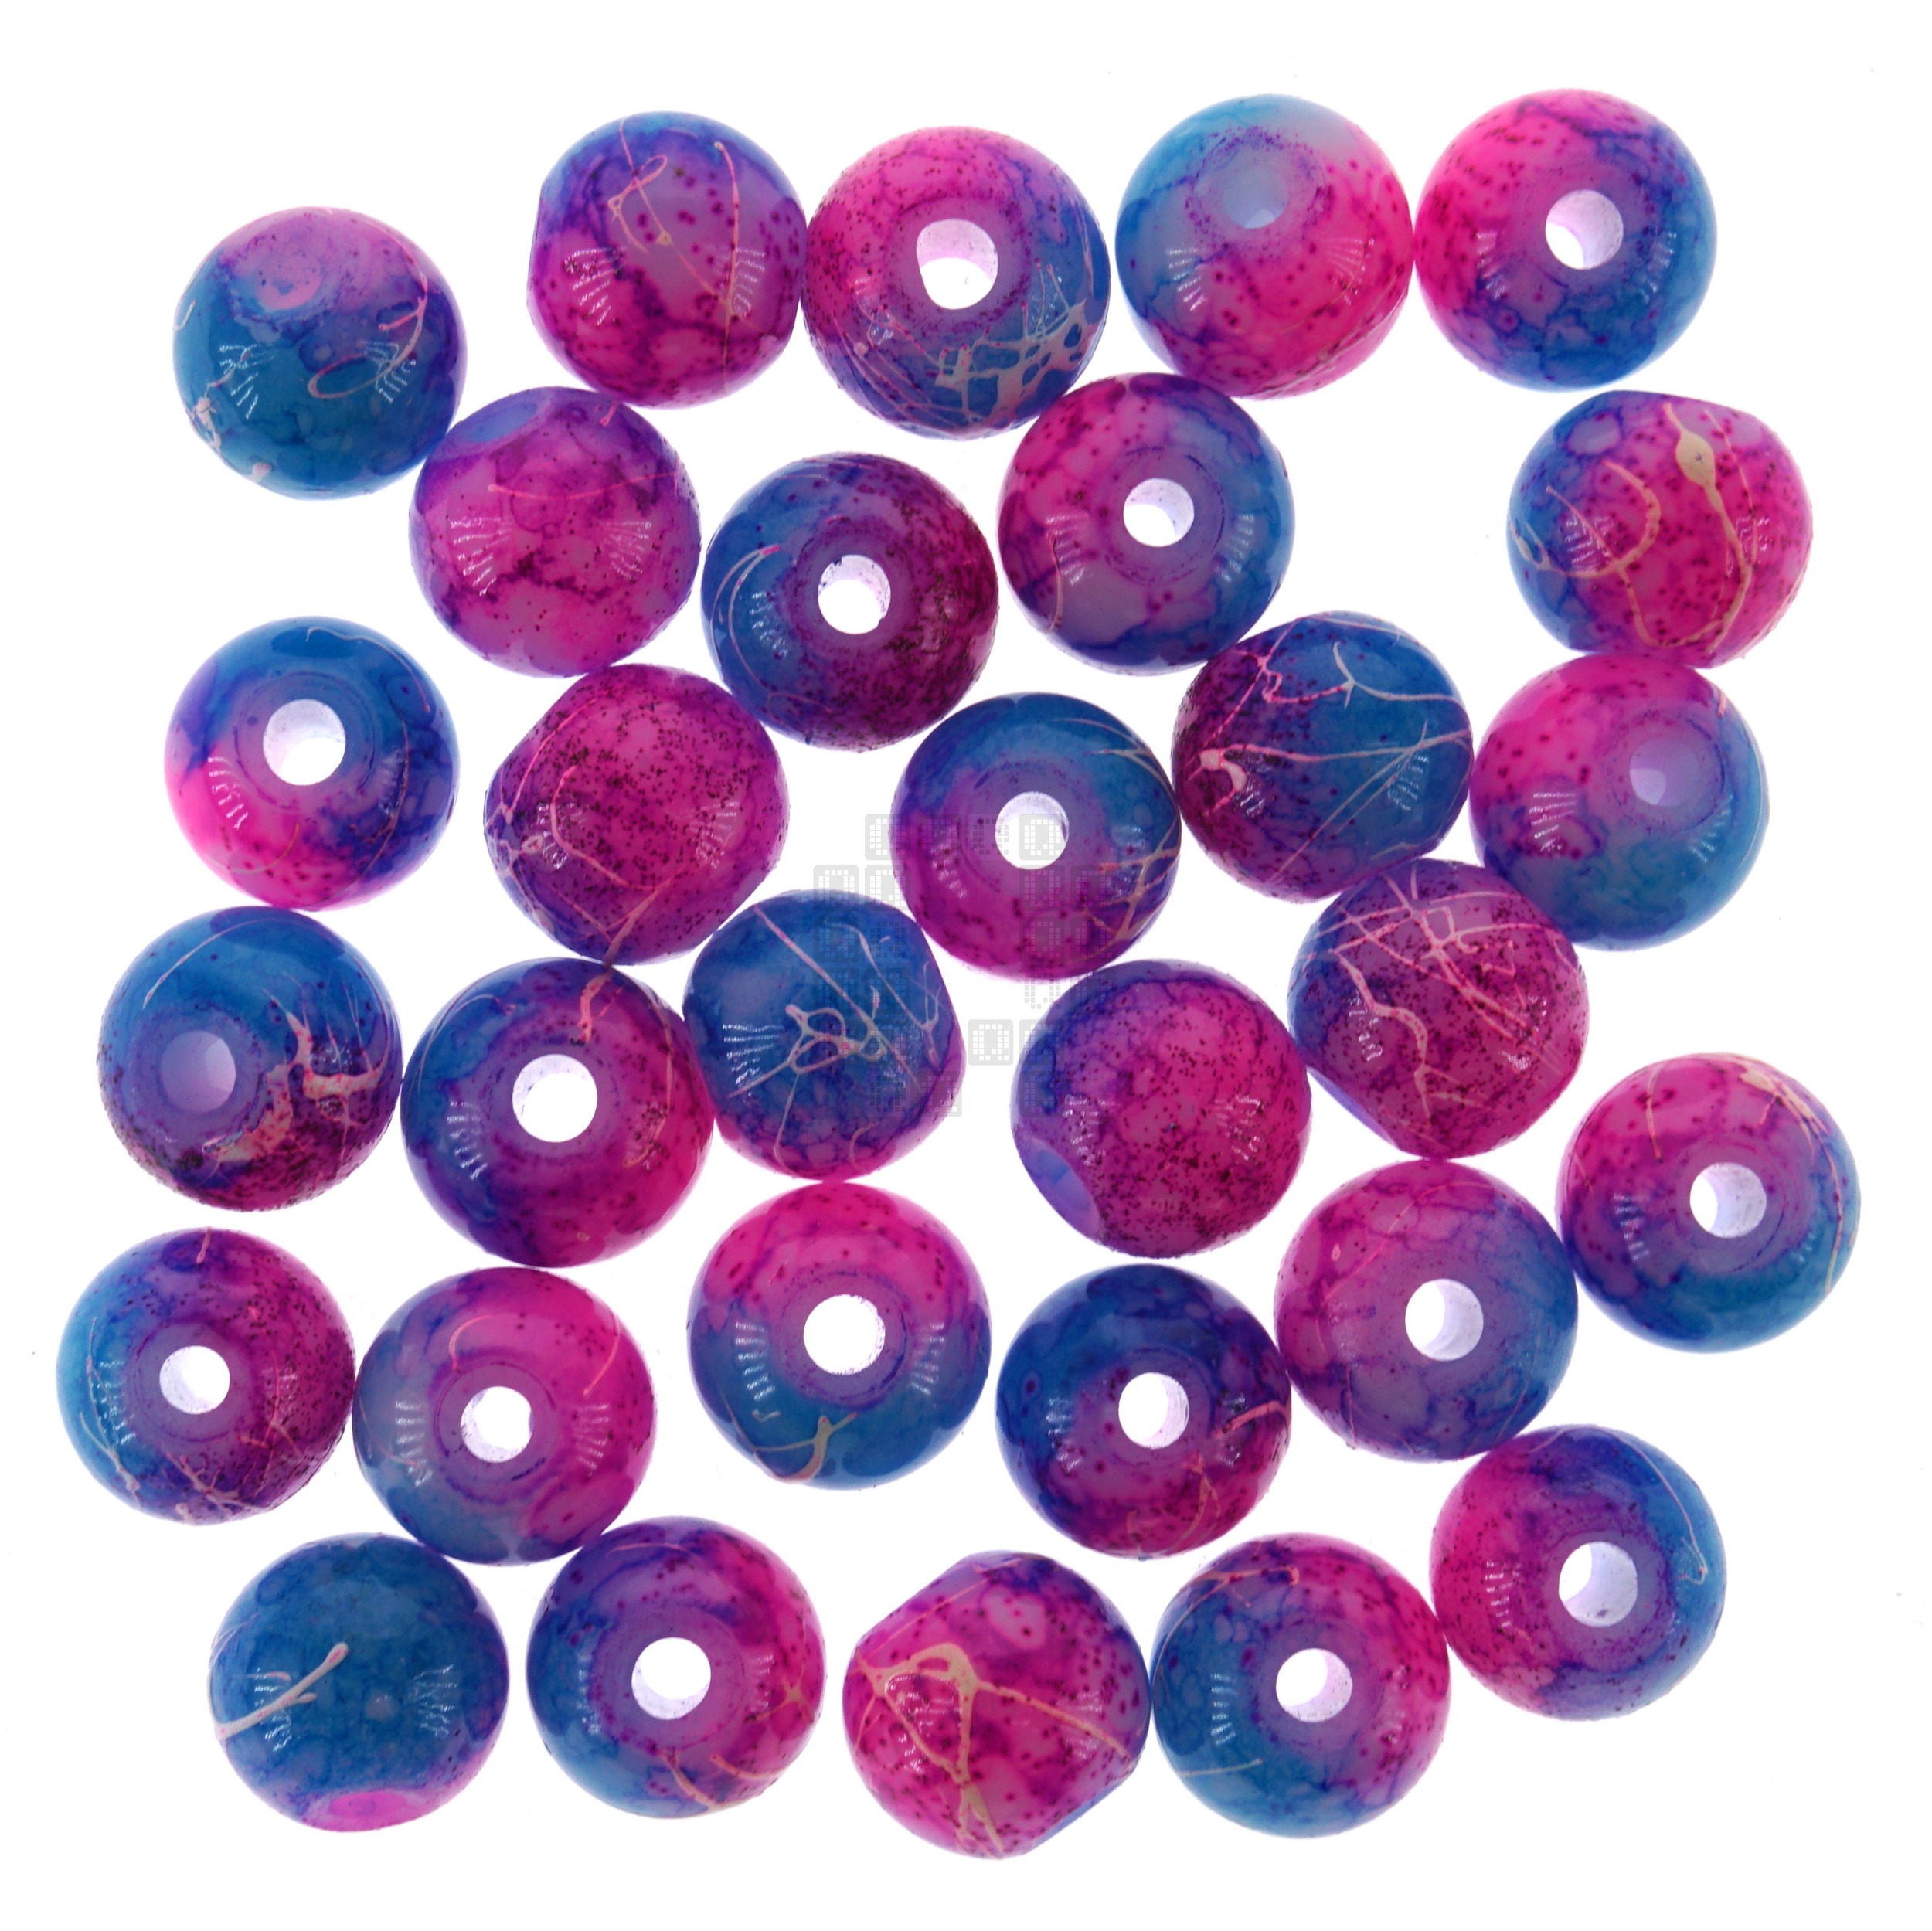 Winter Sunset 8mm Loose Glass Beads, 30 Pieces